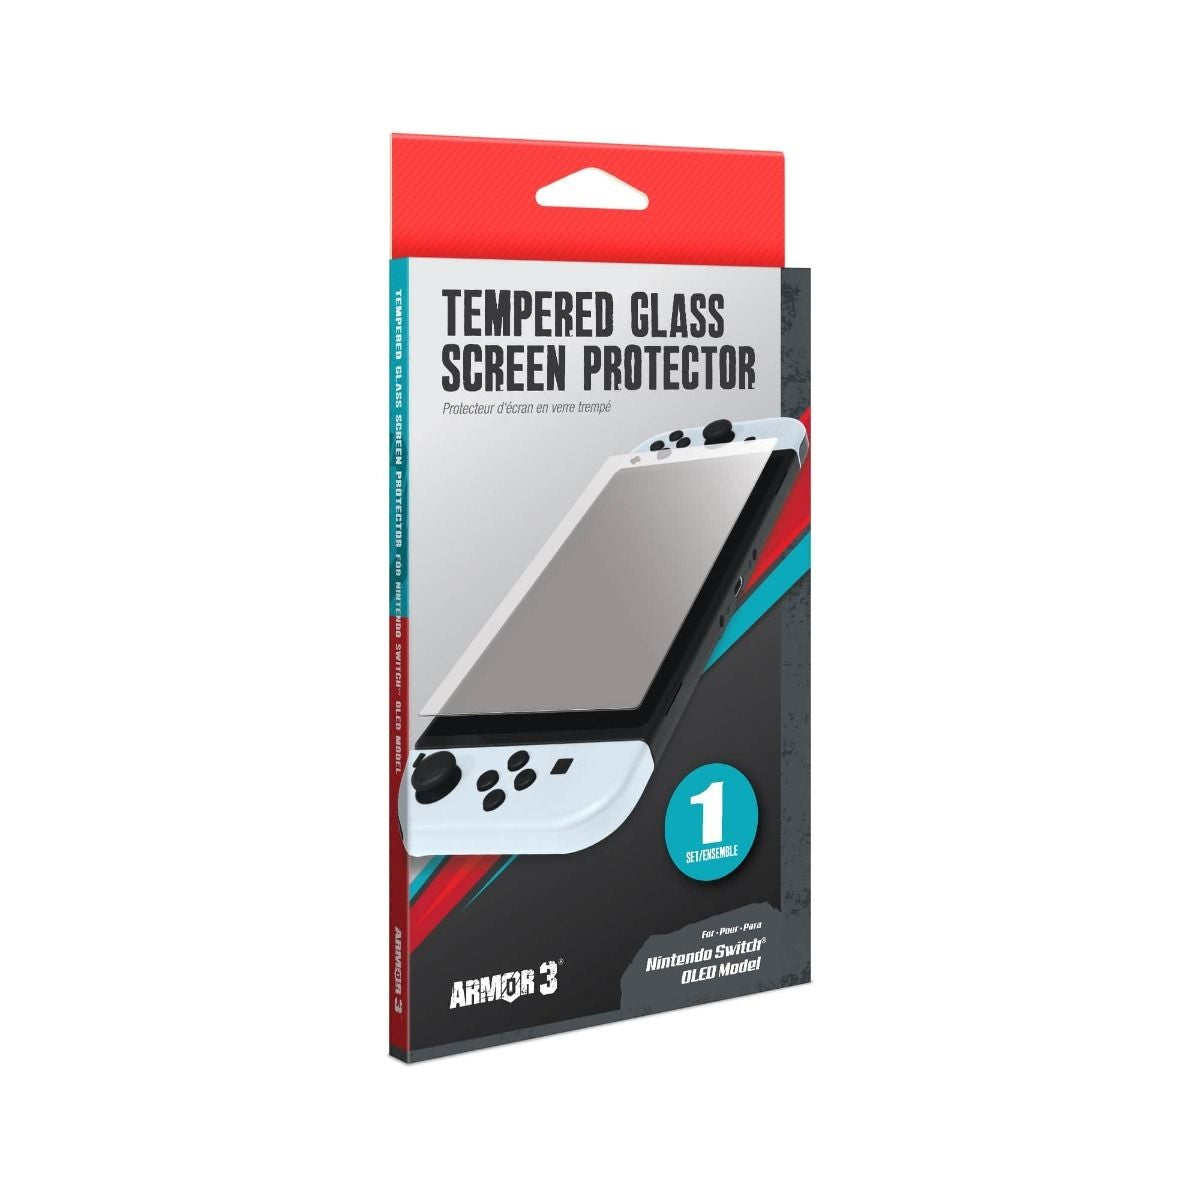 Nintendo Switch OLED Screen Protector | Tempered Glass Hyperkin